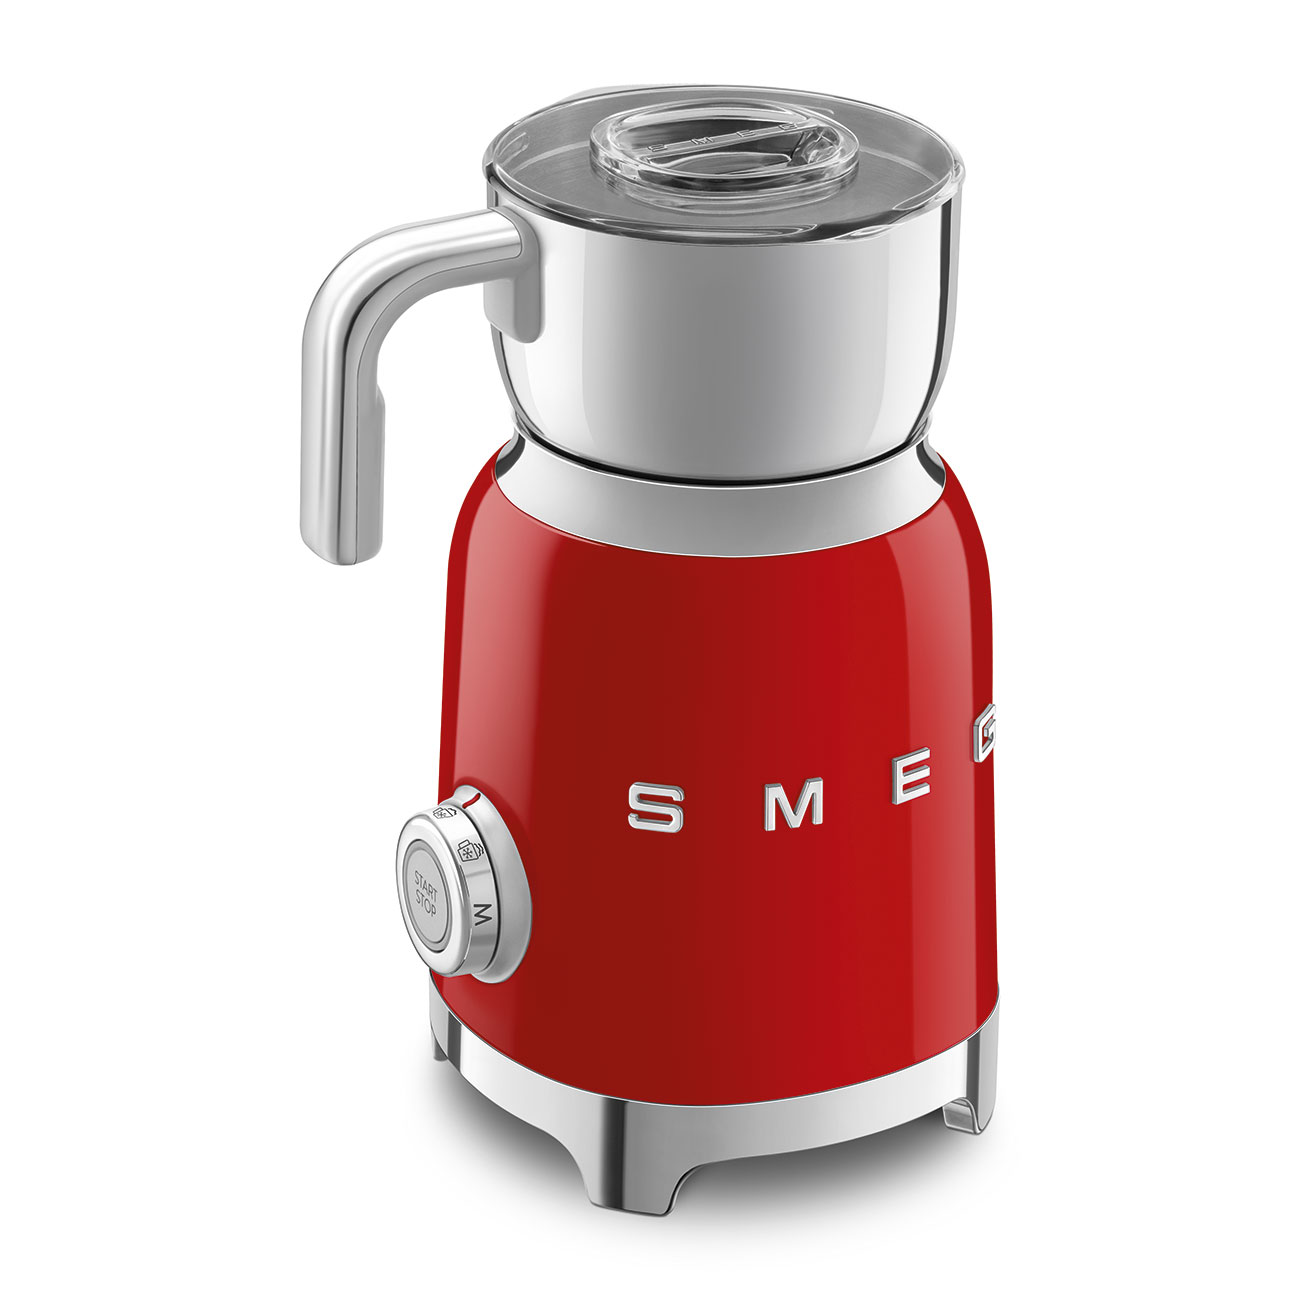 Smeg 50's Style Milk Frother Red MFF11RDSA